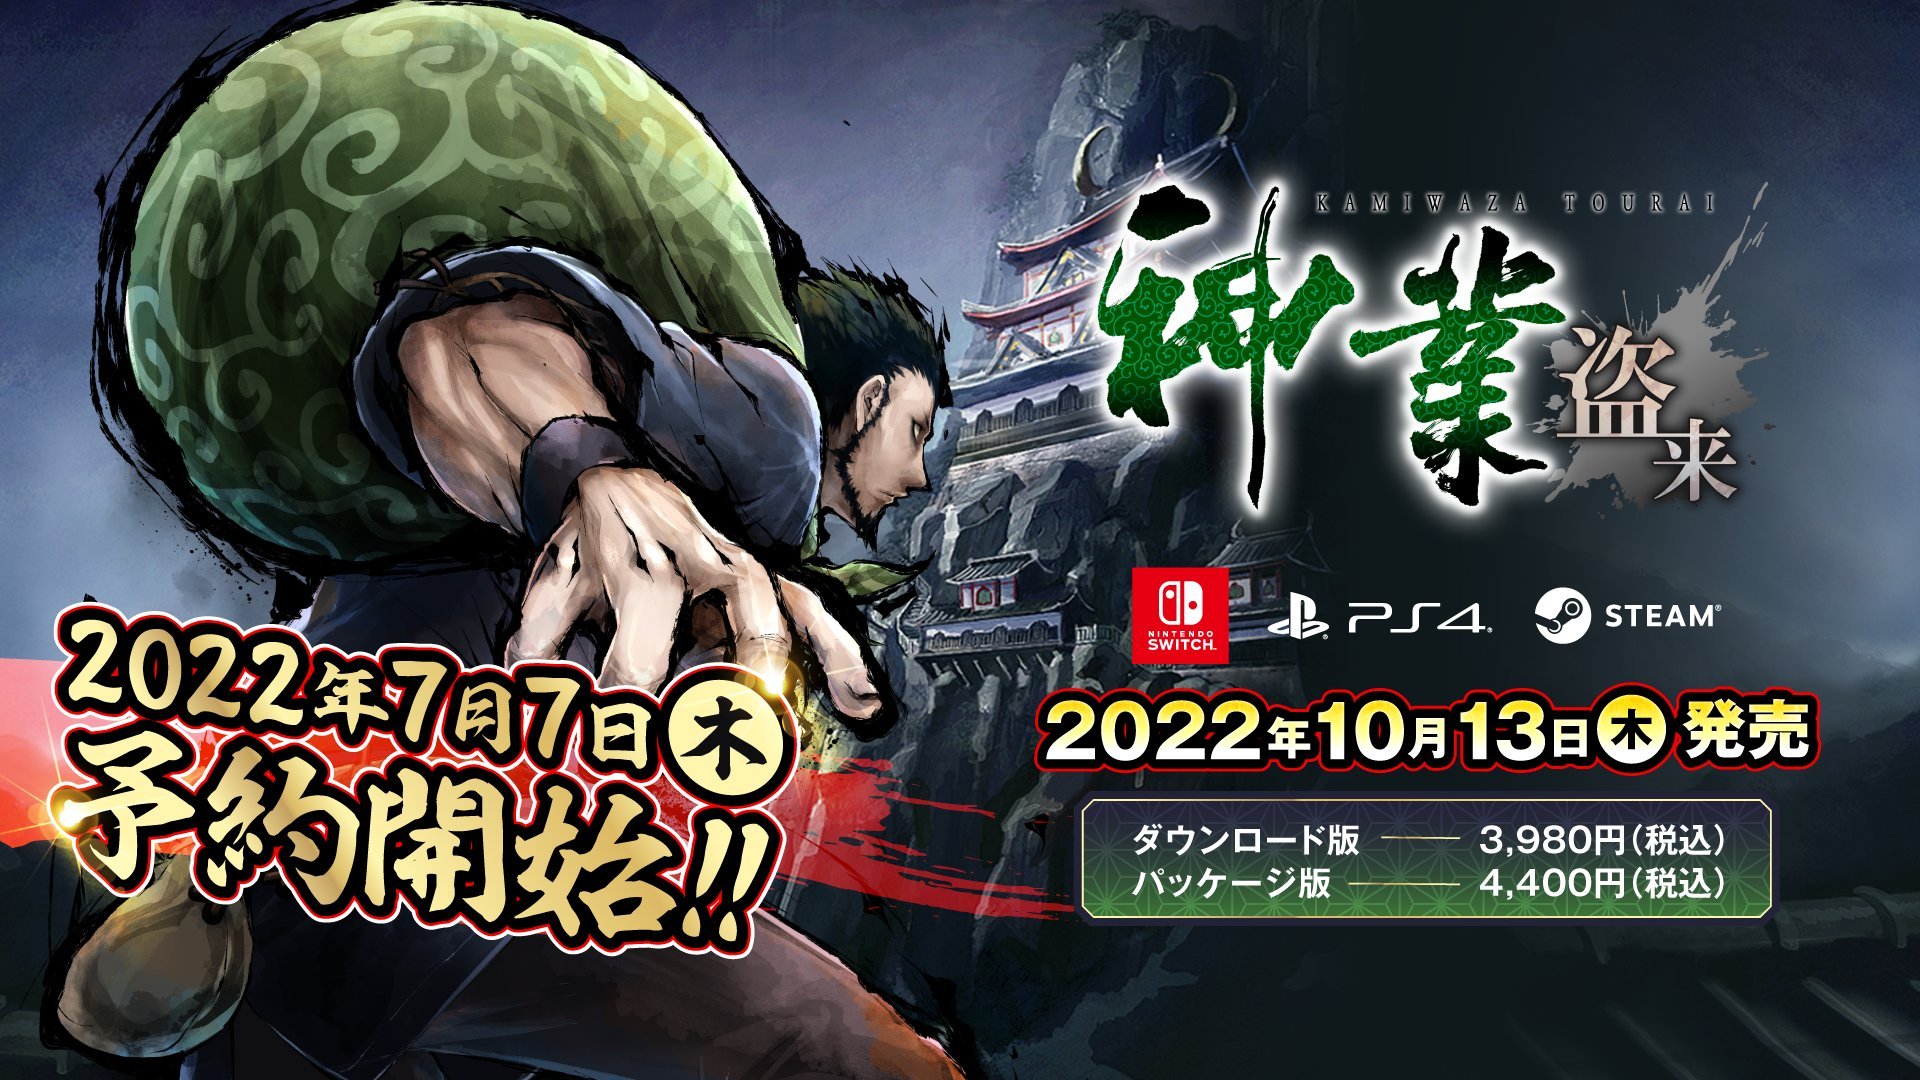 #
      Kamiwaza: Way of the Thief launches October 13 in Japan